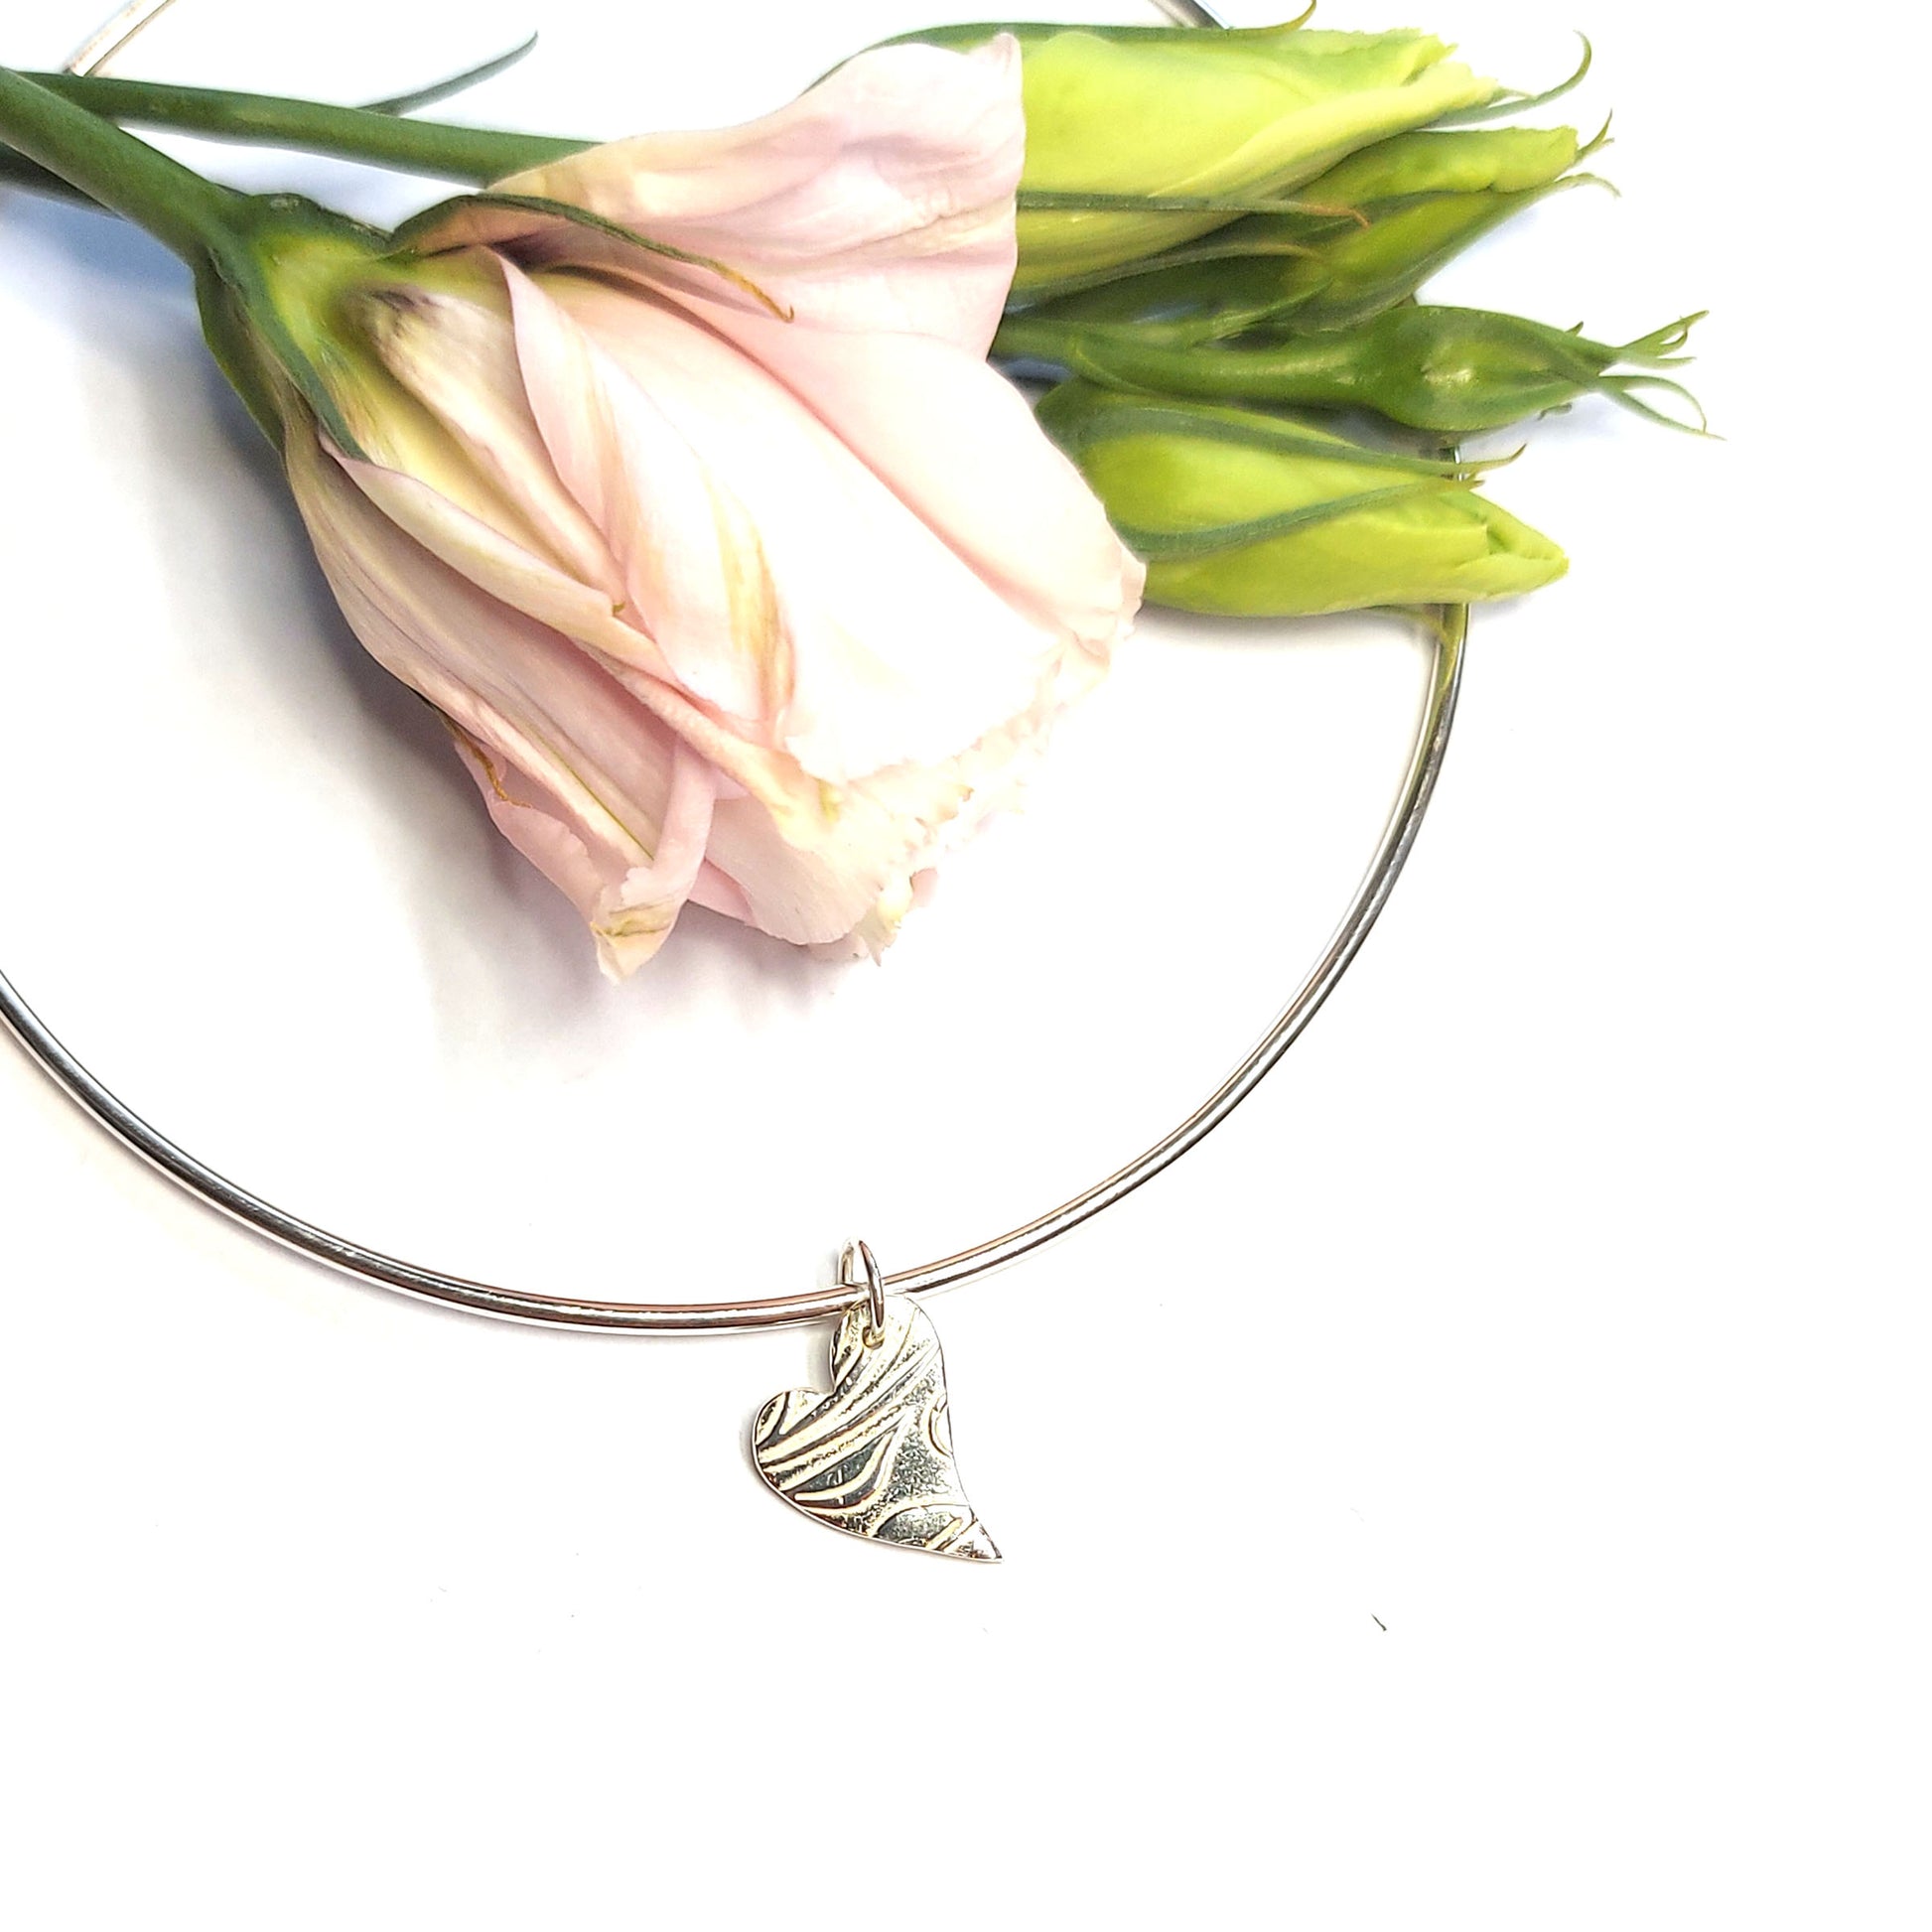 A round silver bangle with an asymmetrical patterned heart charm. Pictured with flowers